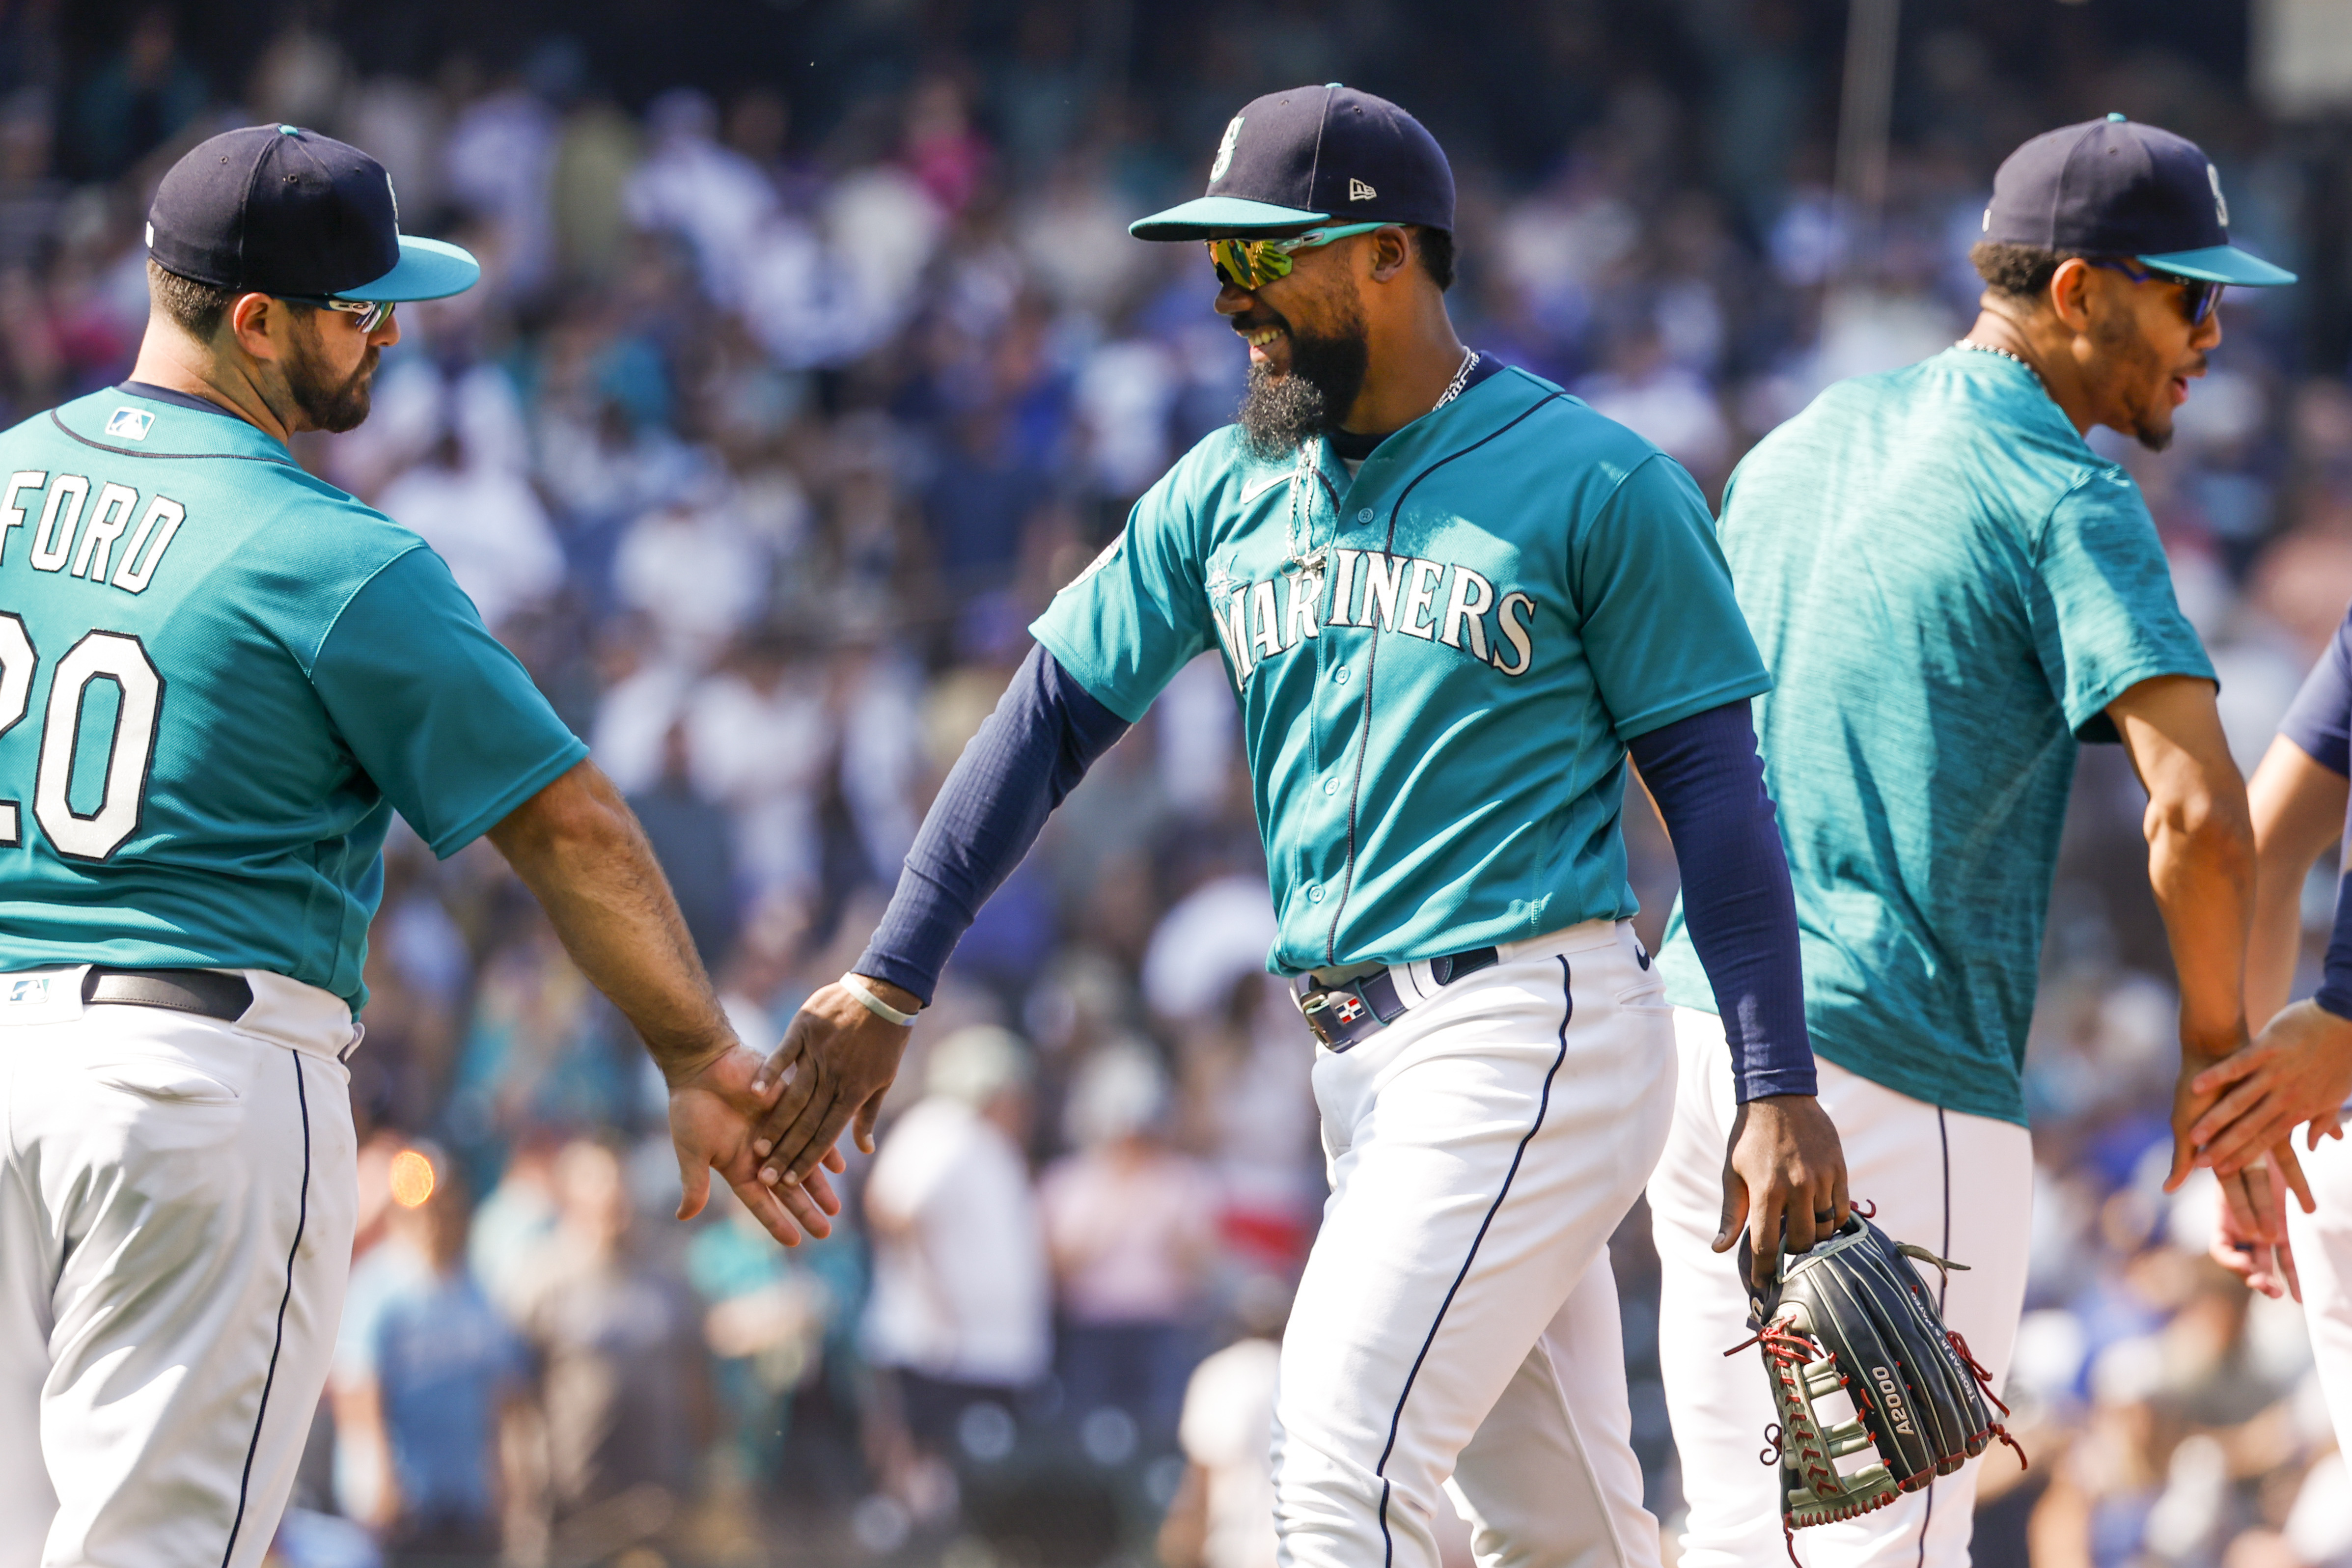 MLB roundup: Mariners blast 7 homers in 15-2 rout of Royals